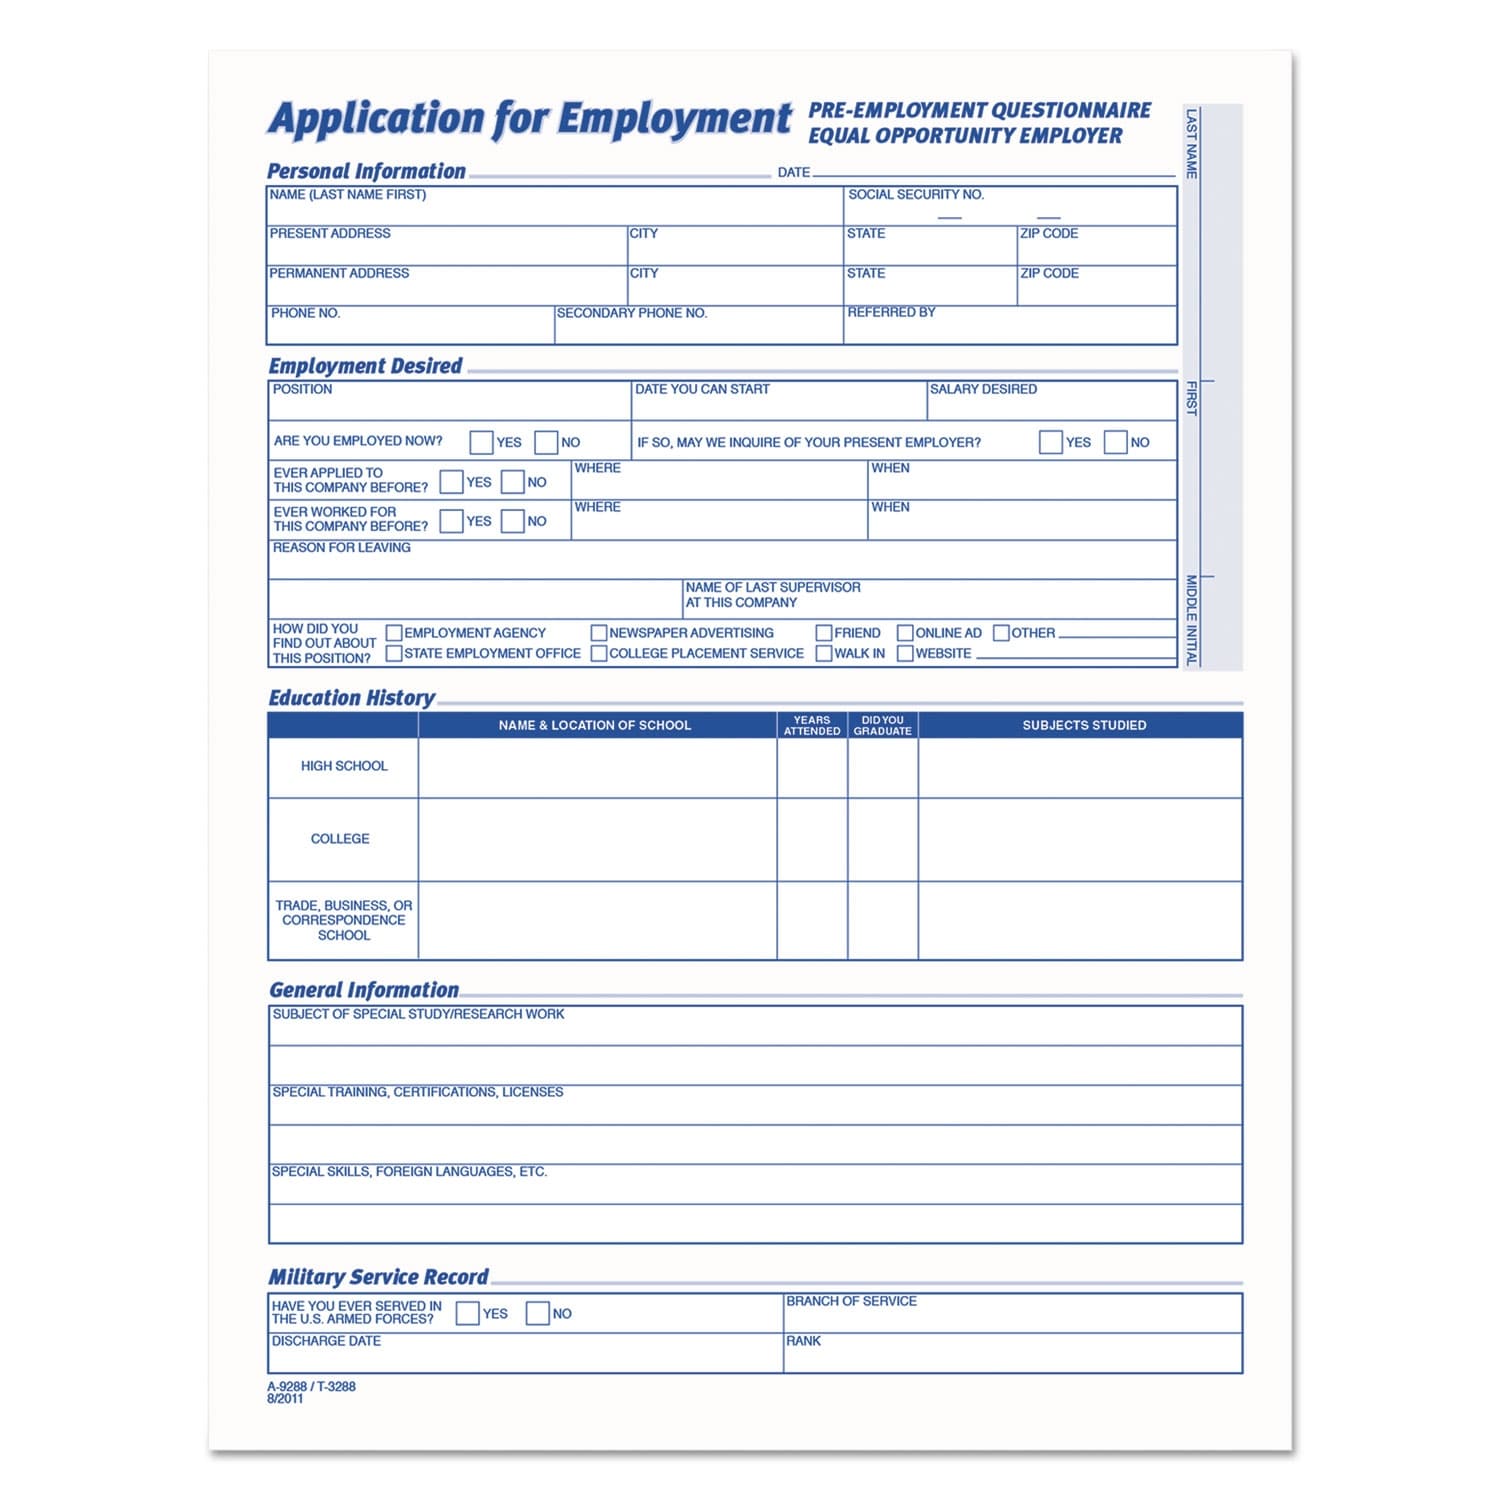 Comprehensive Employee Application Form, 8.5 x 11, 1/Page, 25 Forms - White